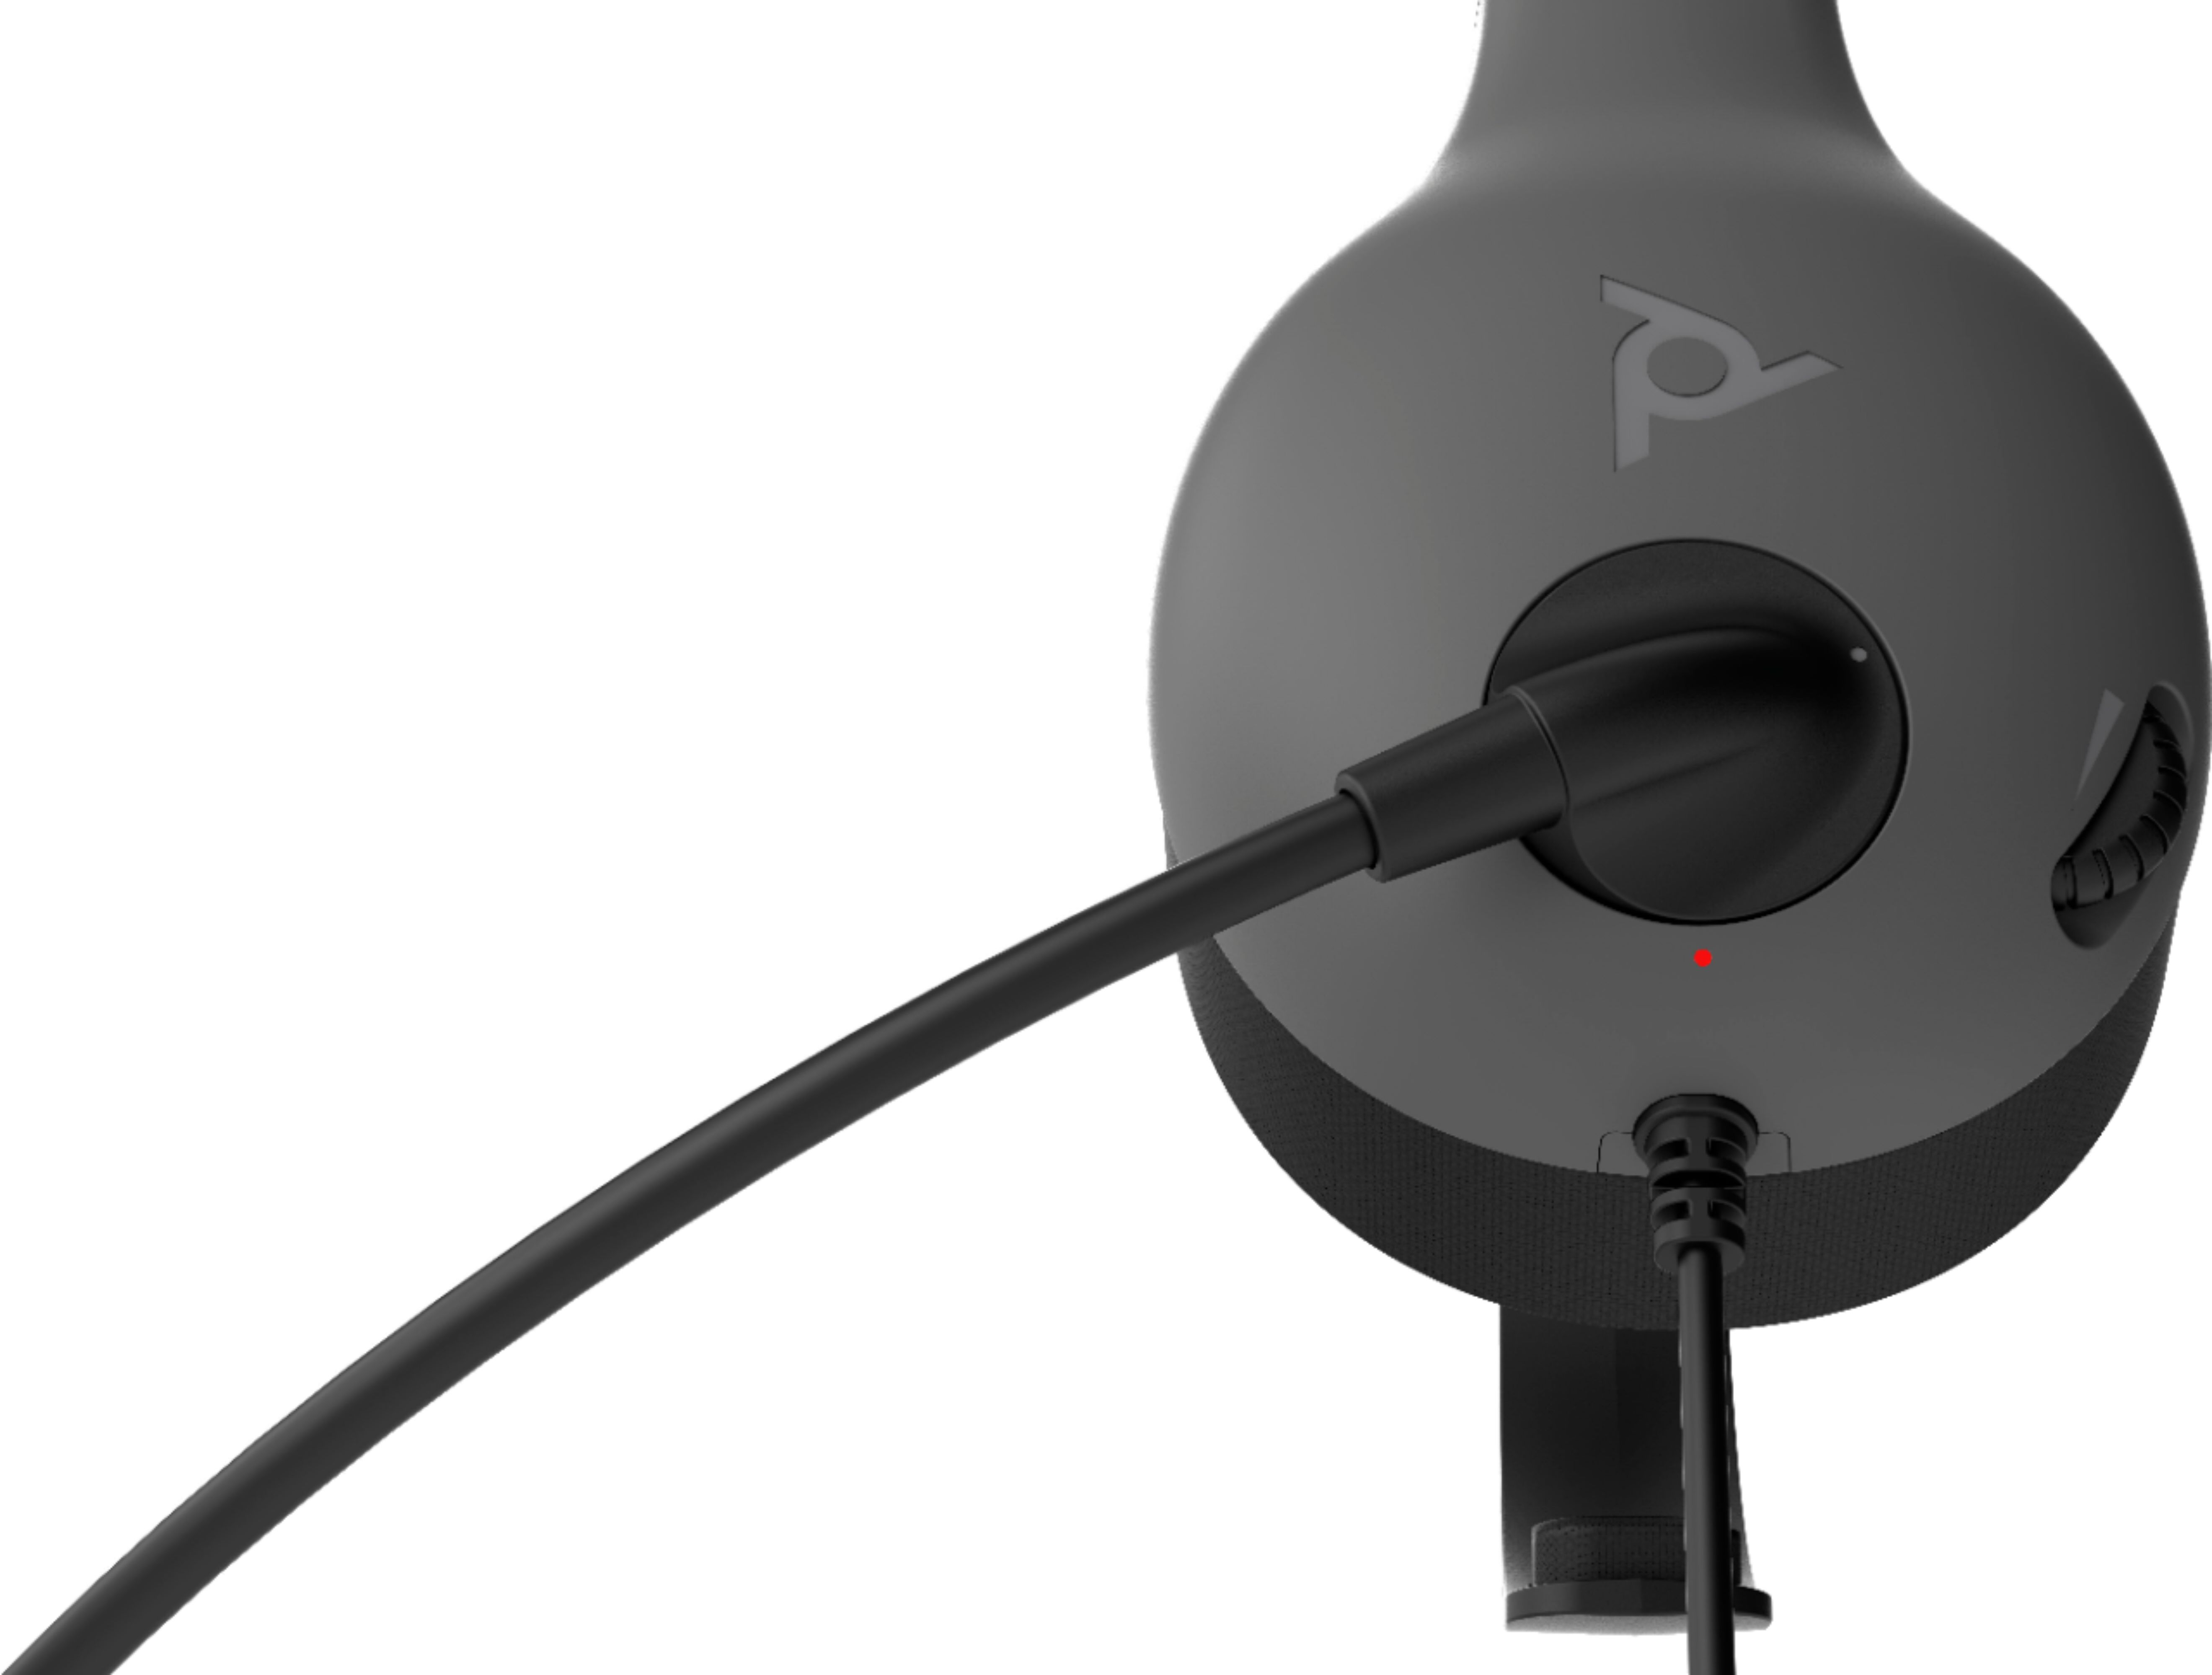 LVL30 Wired Chat Headset for PS4  Fight fatigue with the ability